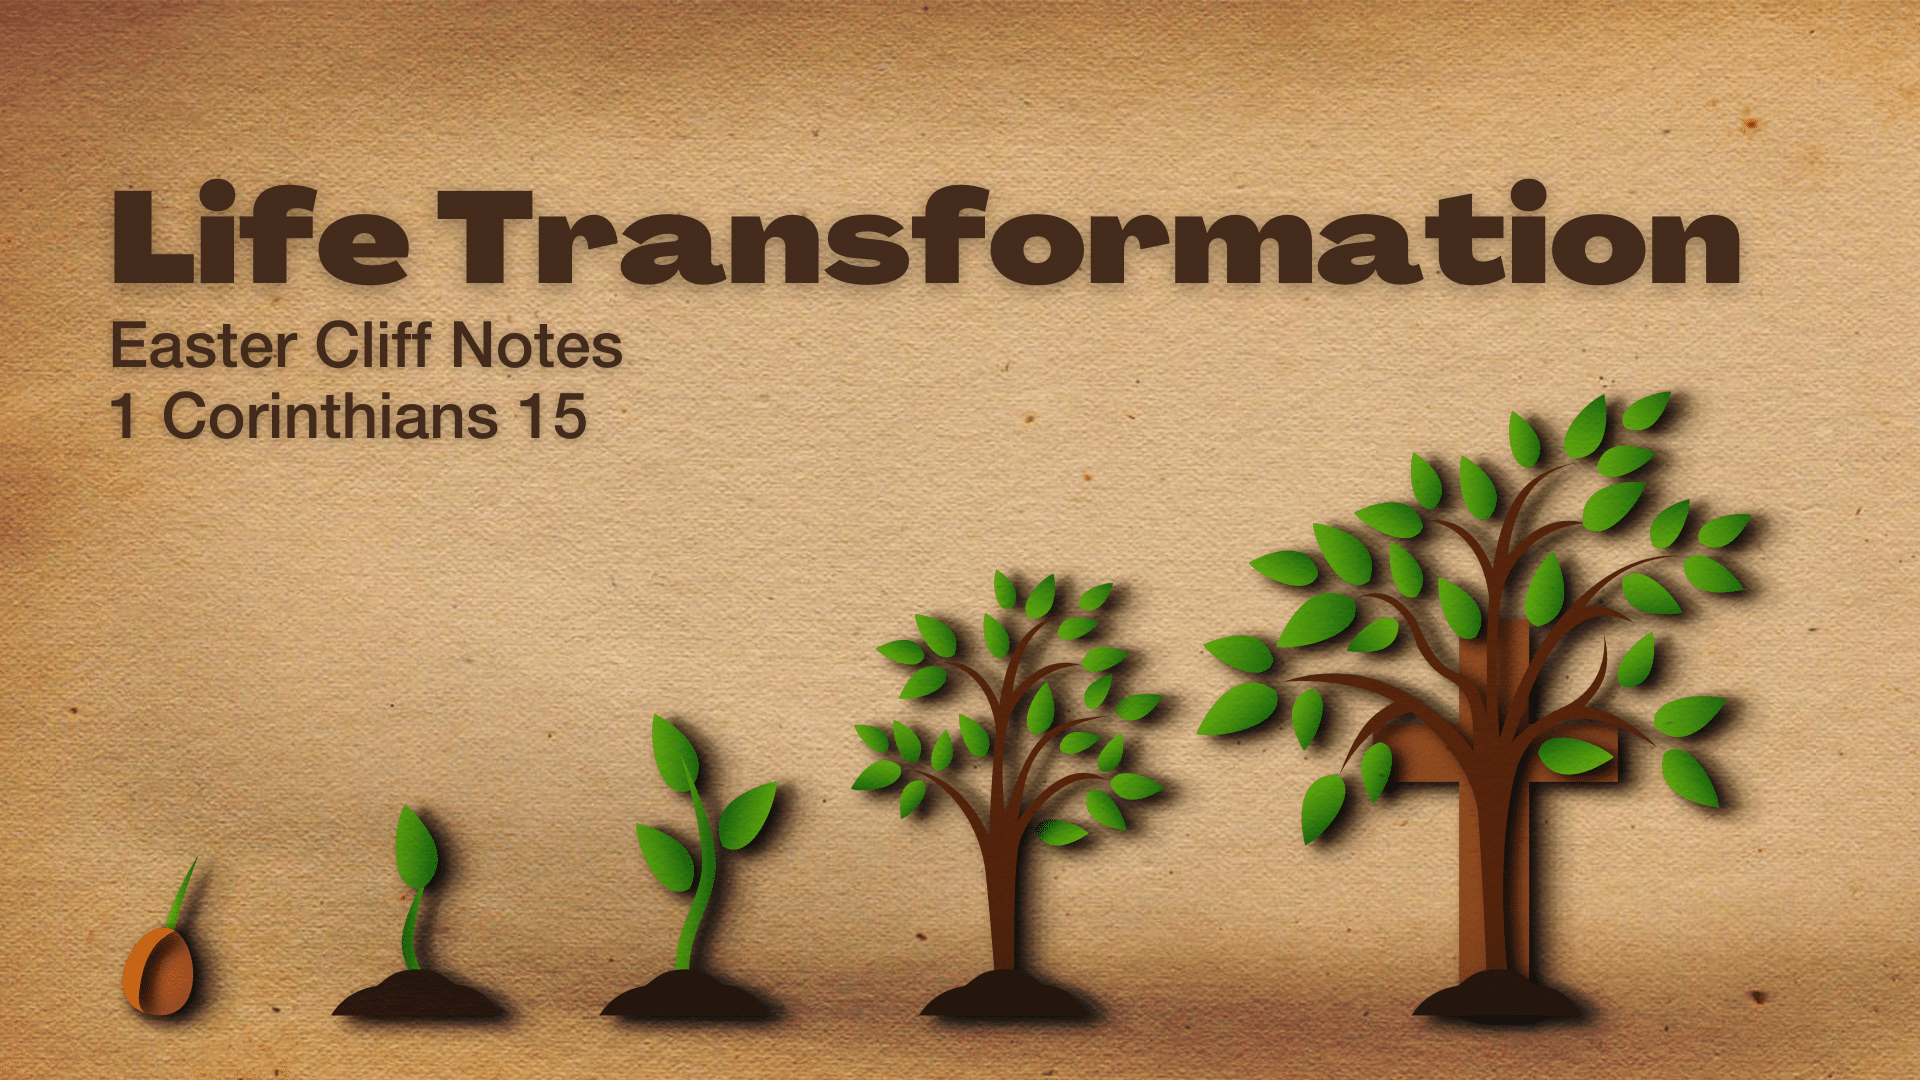 Life Transformation: Easter Cliff Notes